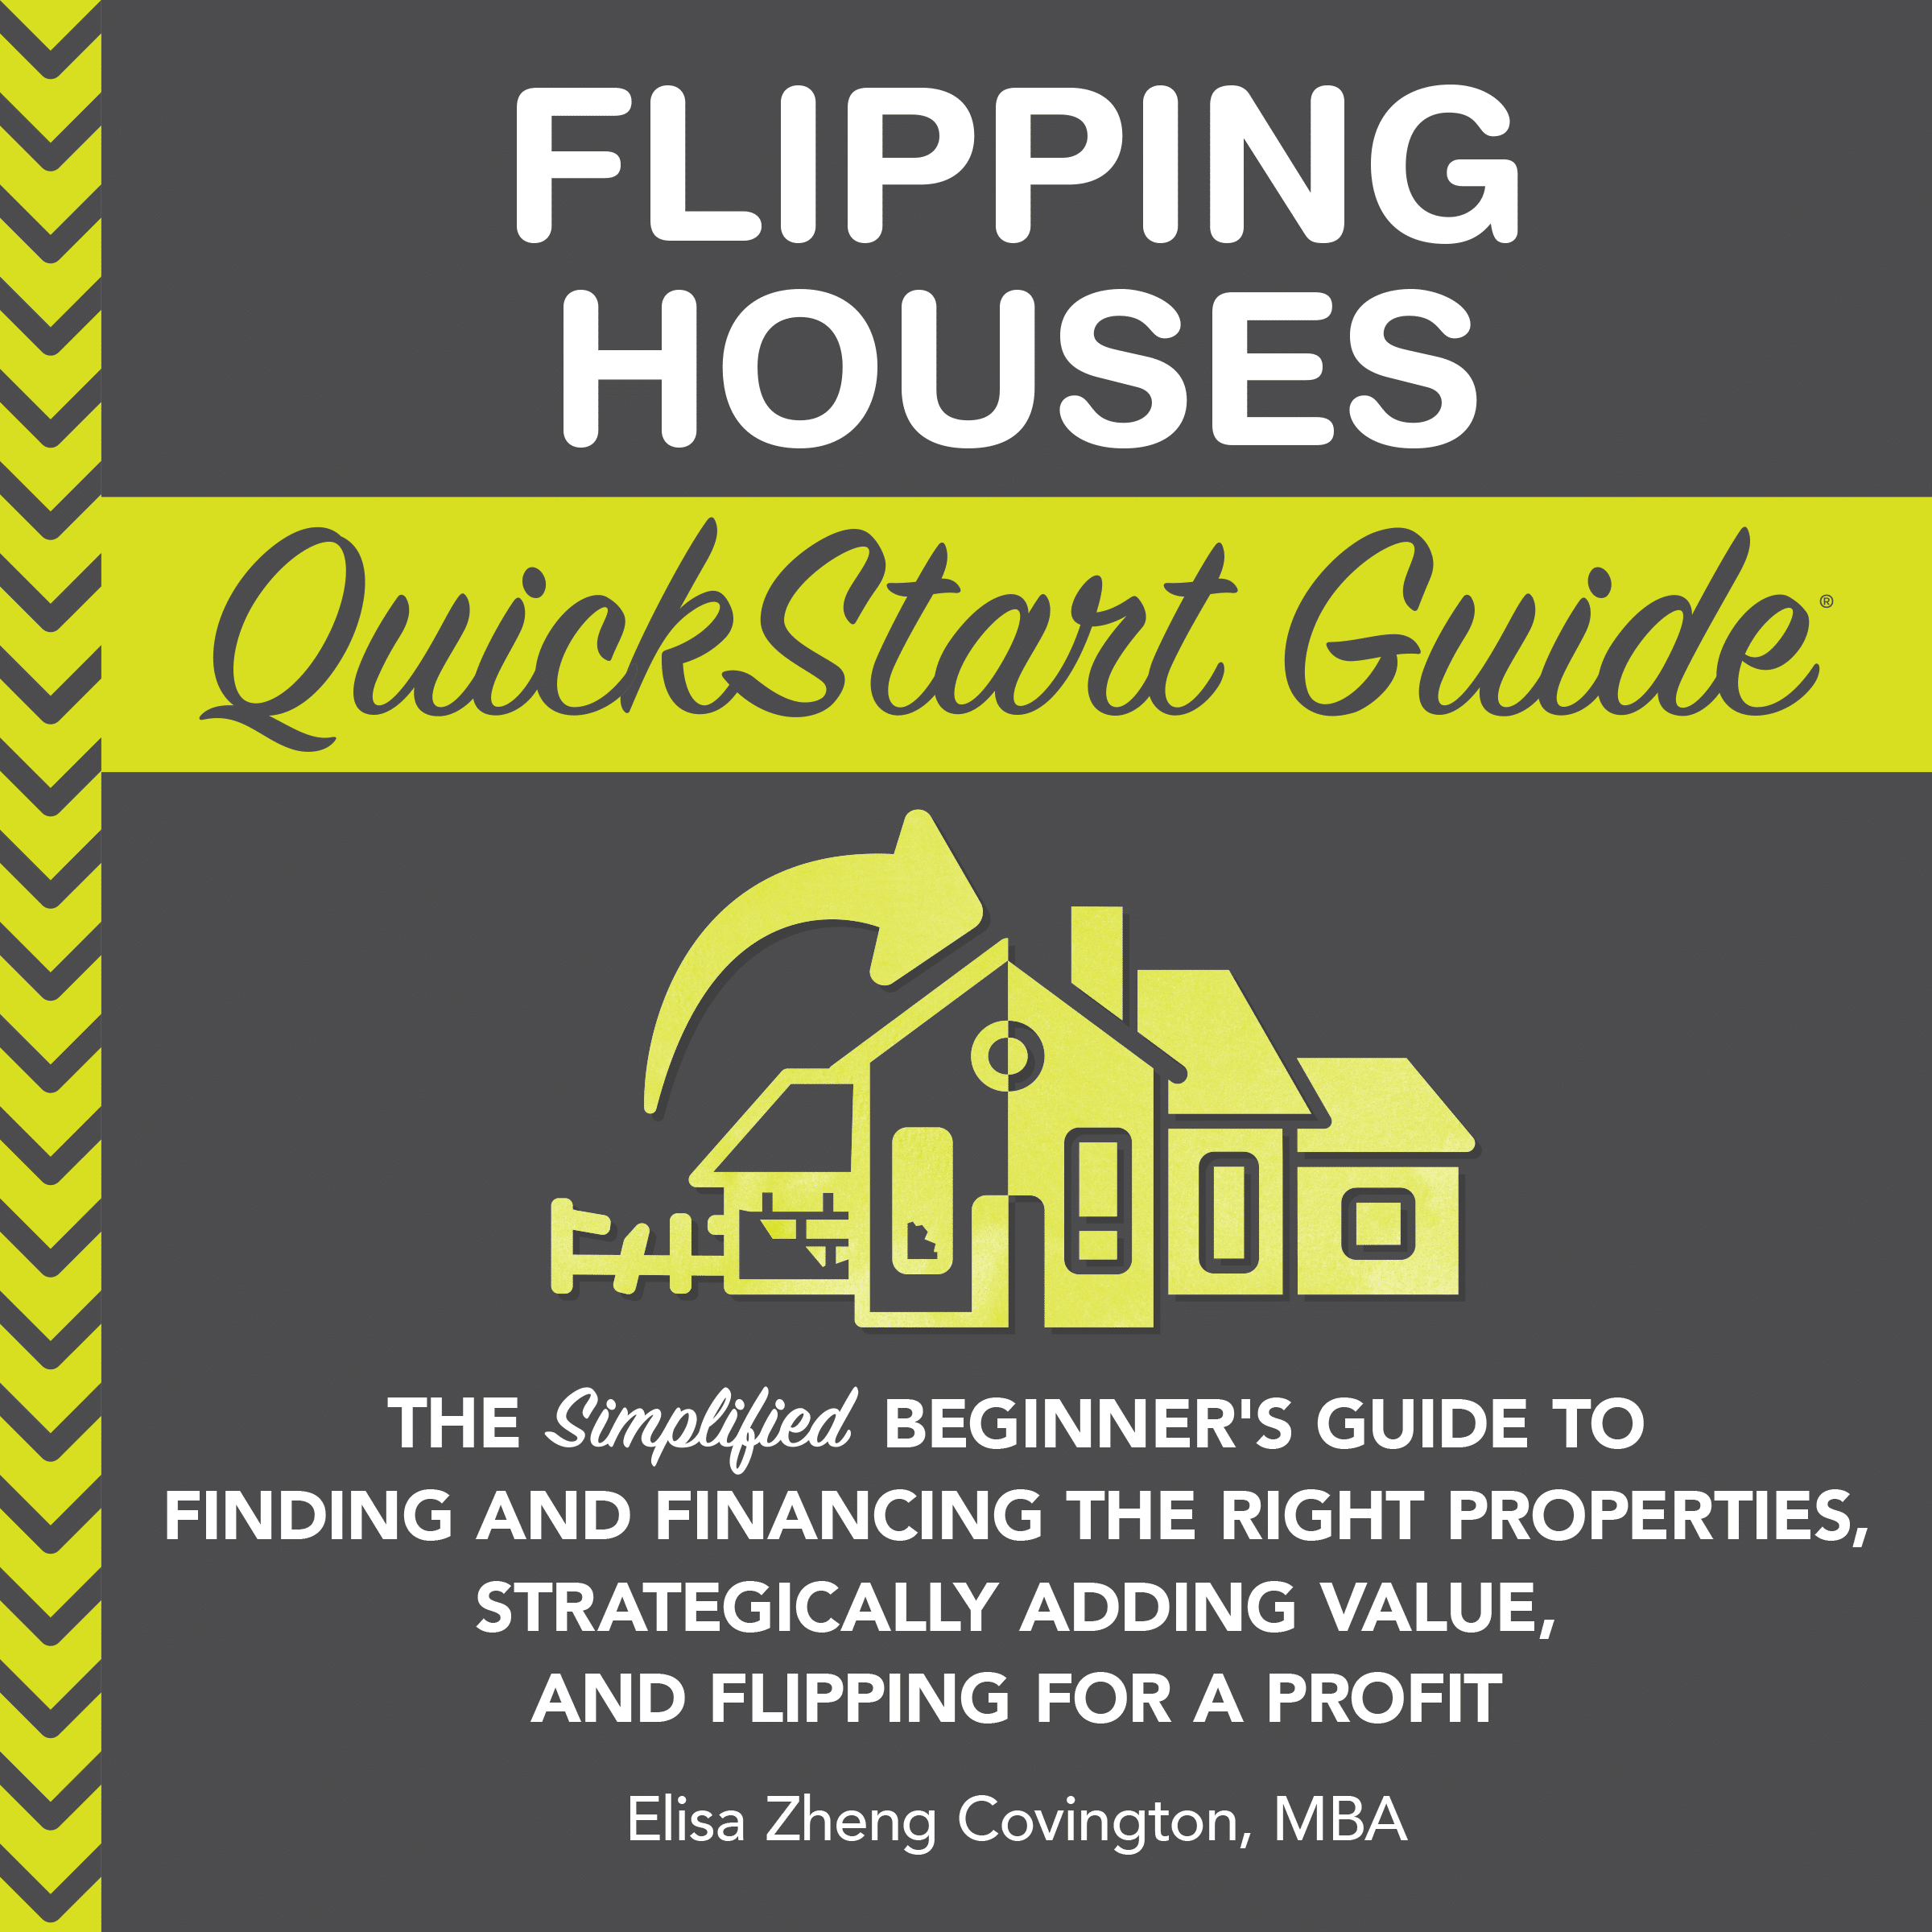 Flipping Houses QuickStart Guide is now available as an audiobook!